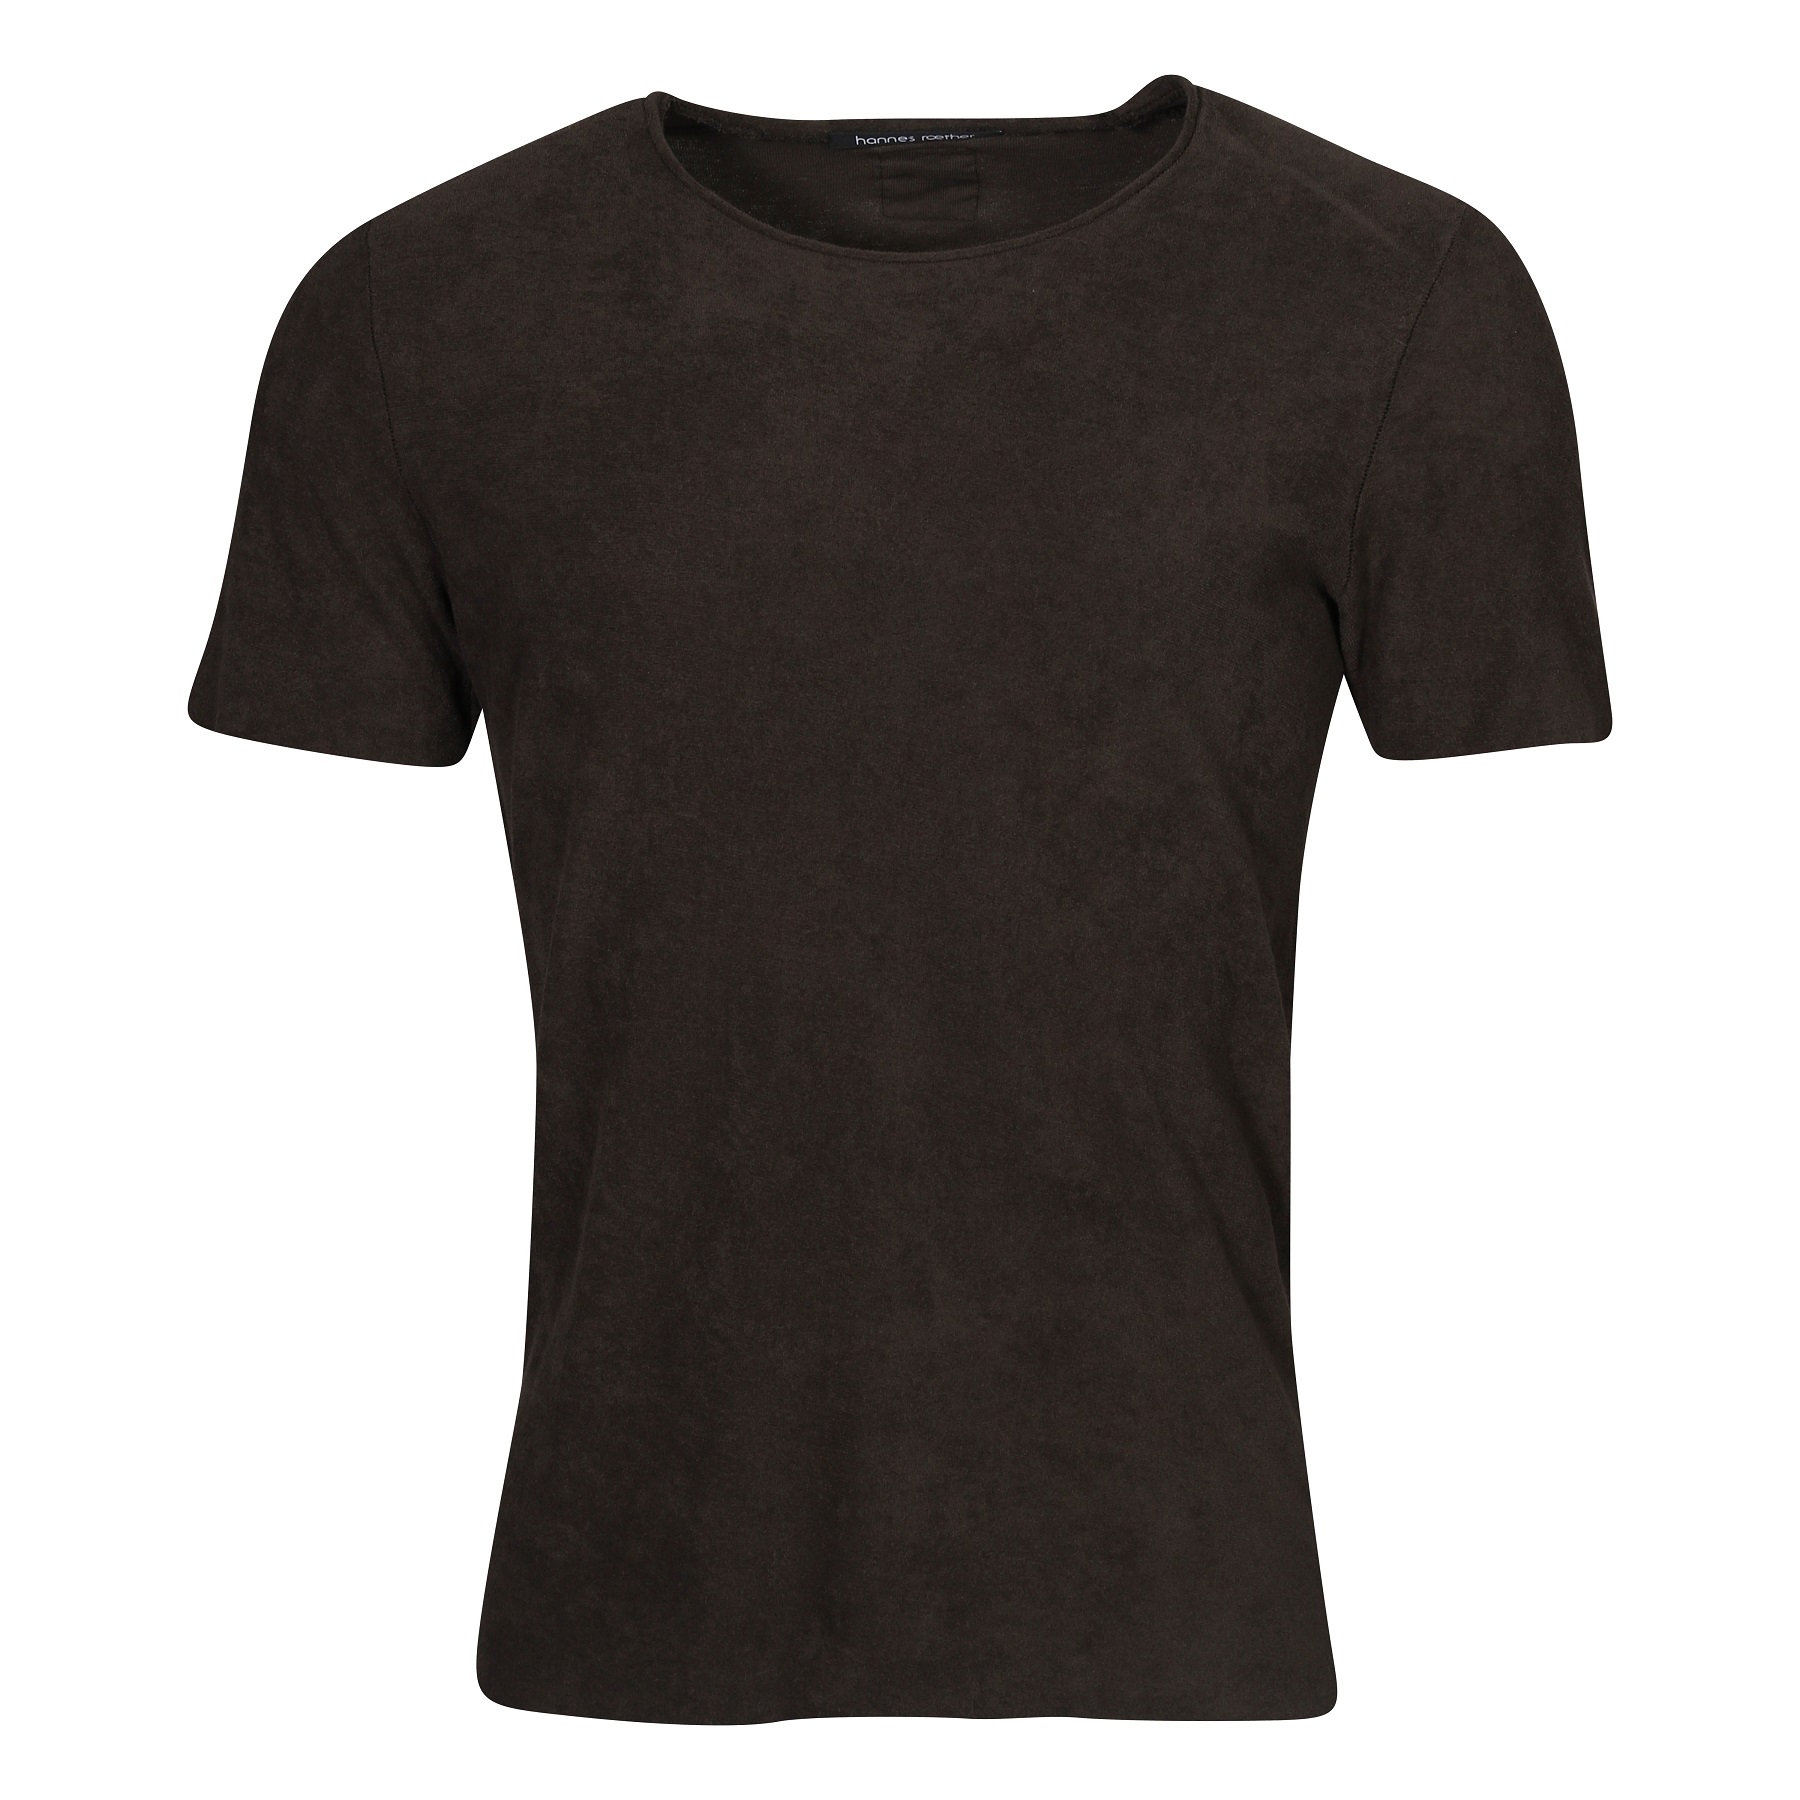 HANNES ROETHER Terry T-Shirt in Brown L